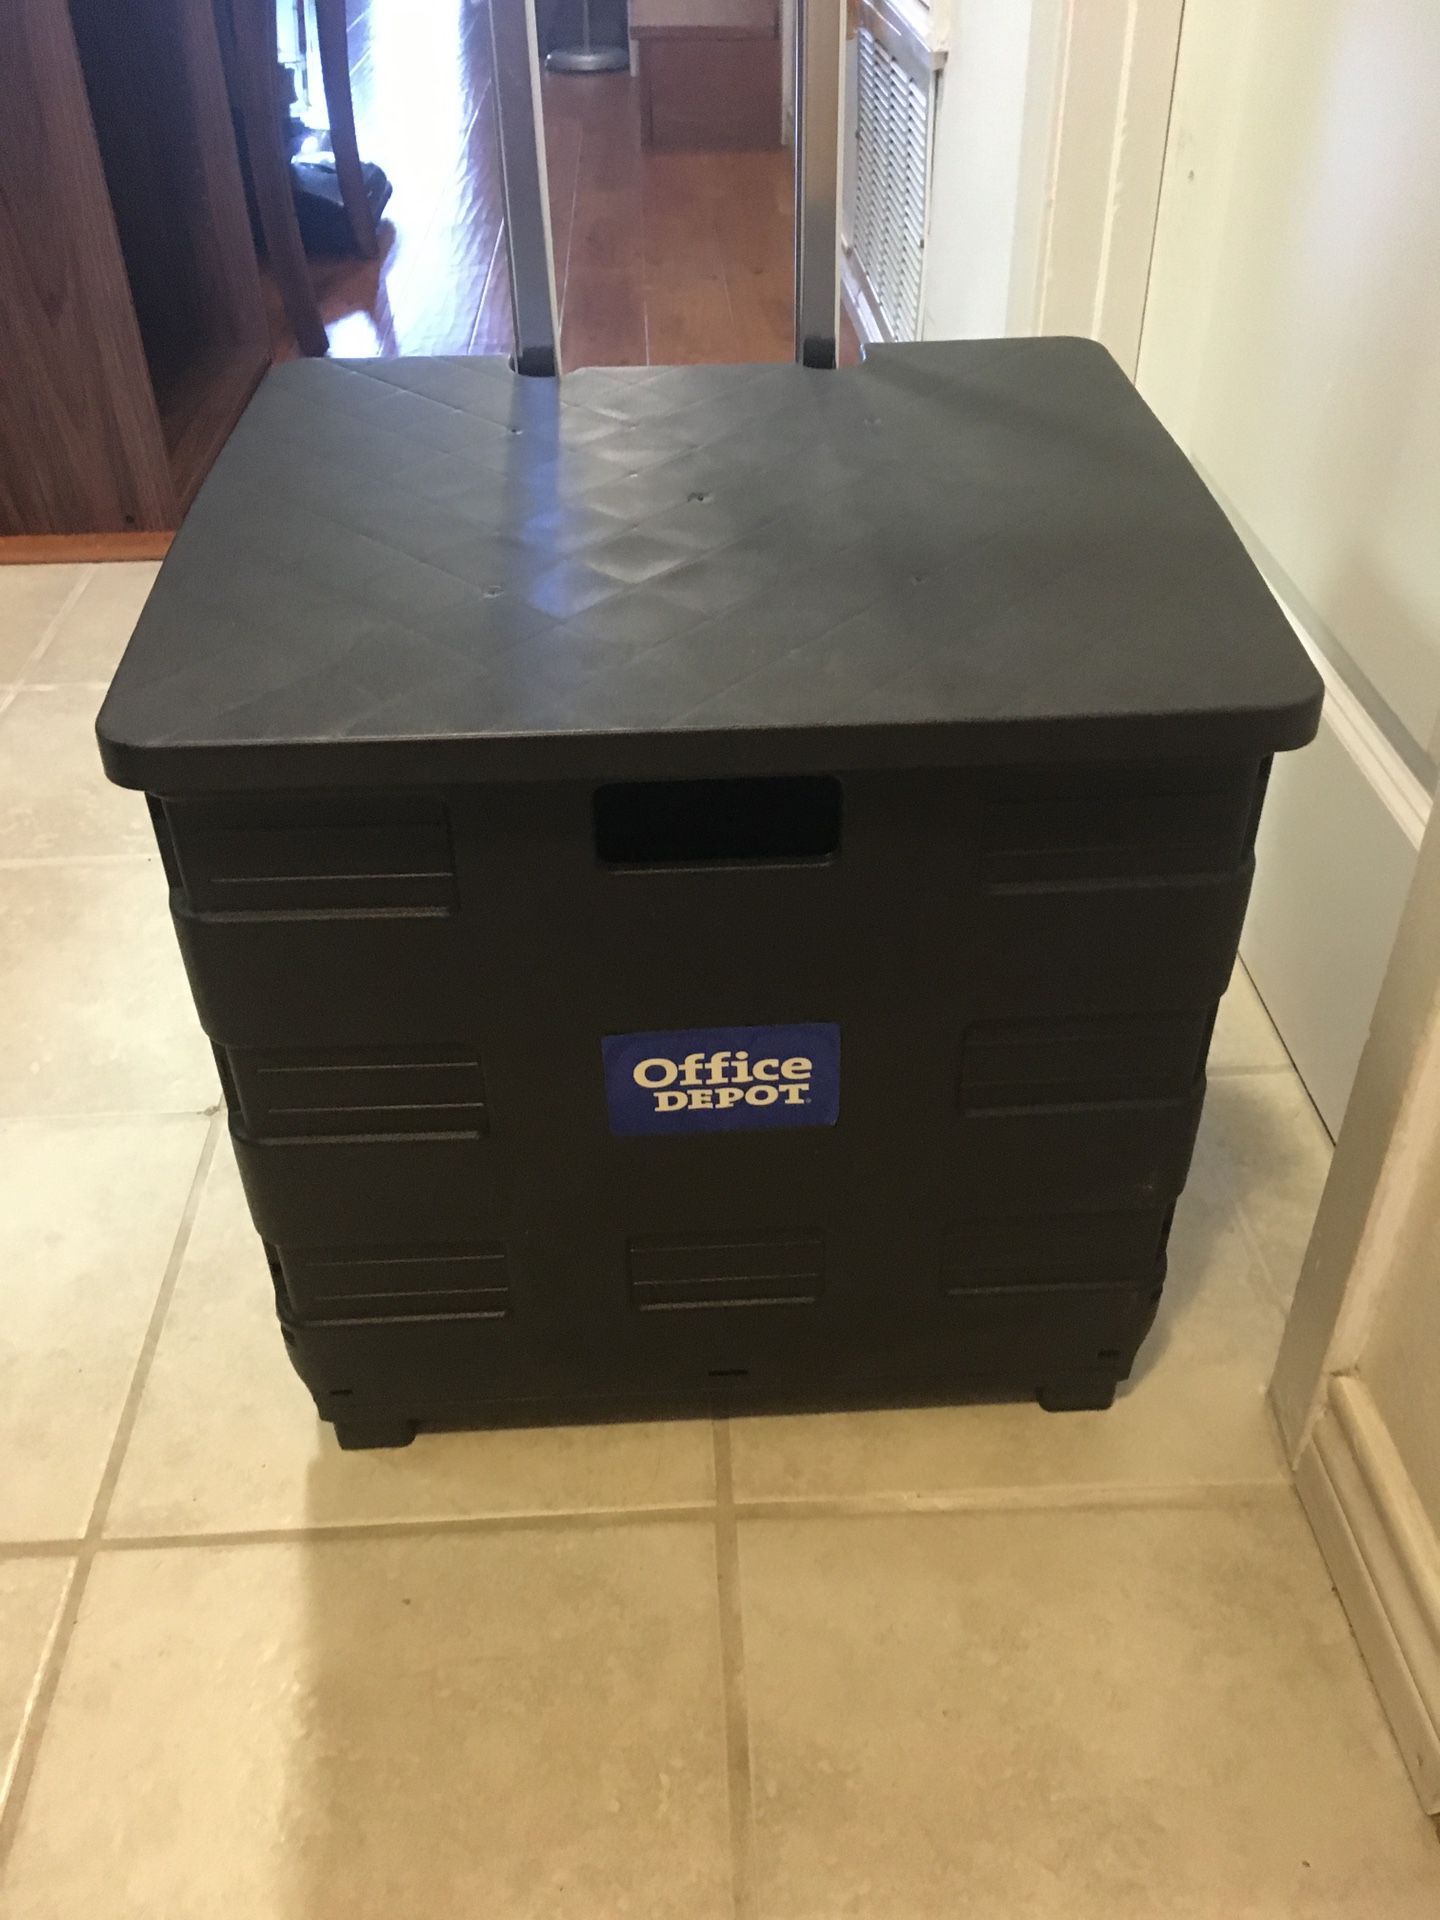 Office Depot Brand Mobile Folding  Cart With Lid. Like New . Dimensions are;18”W x 15”D x 16”H.